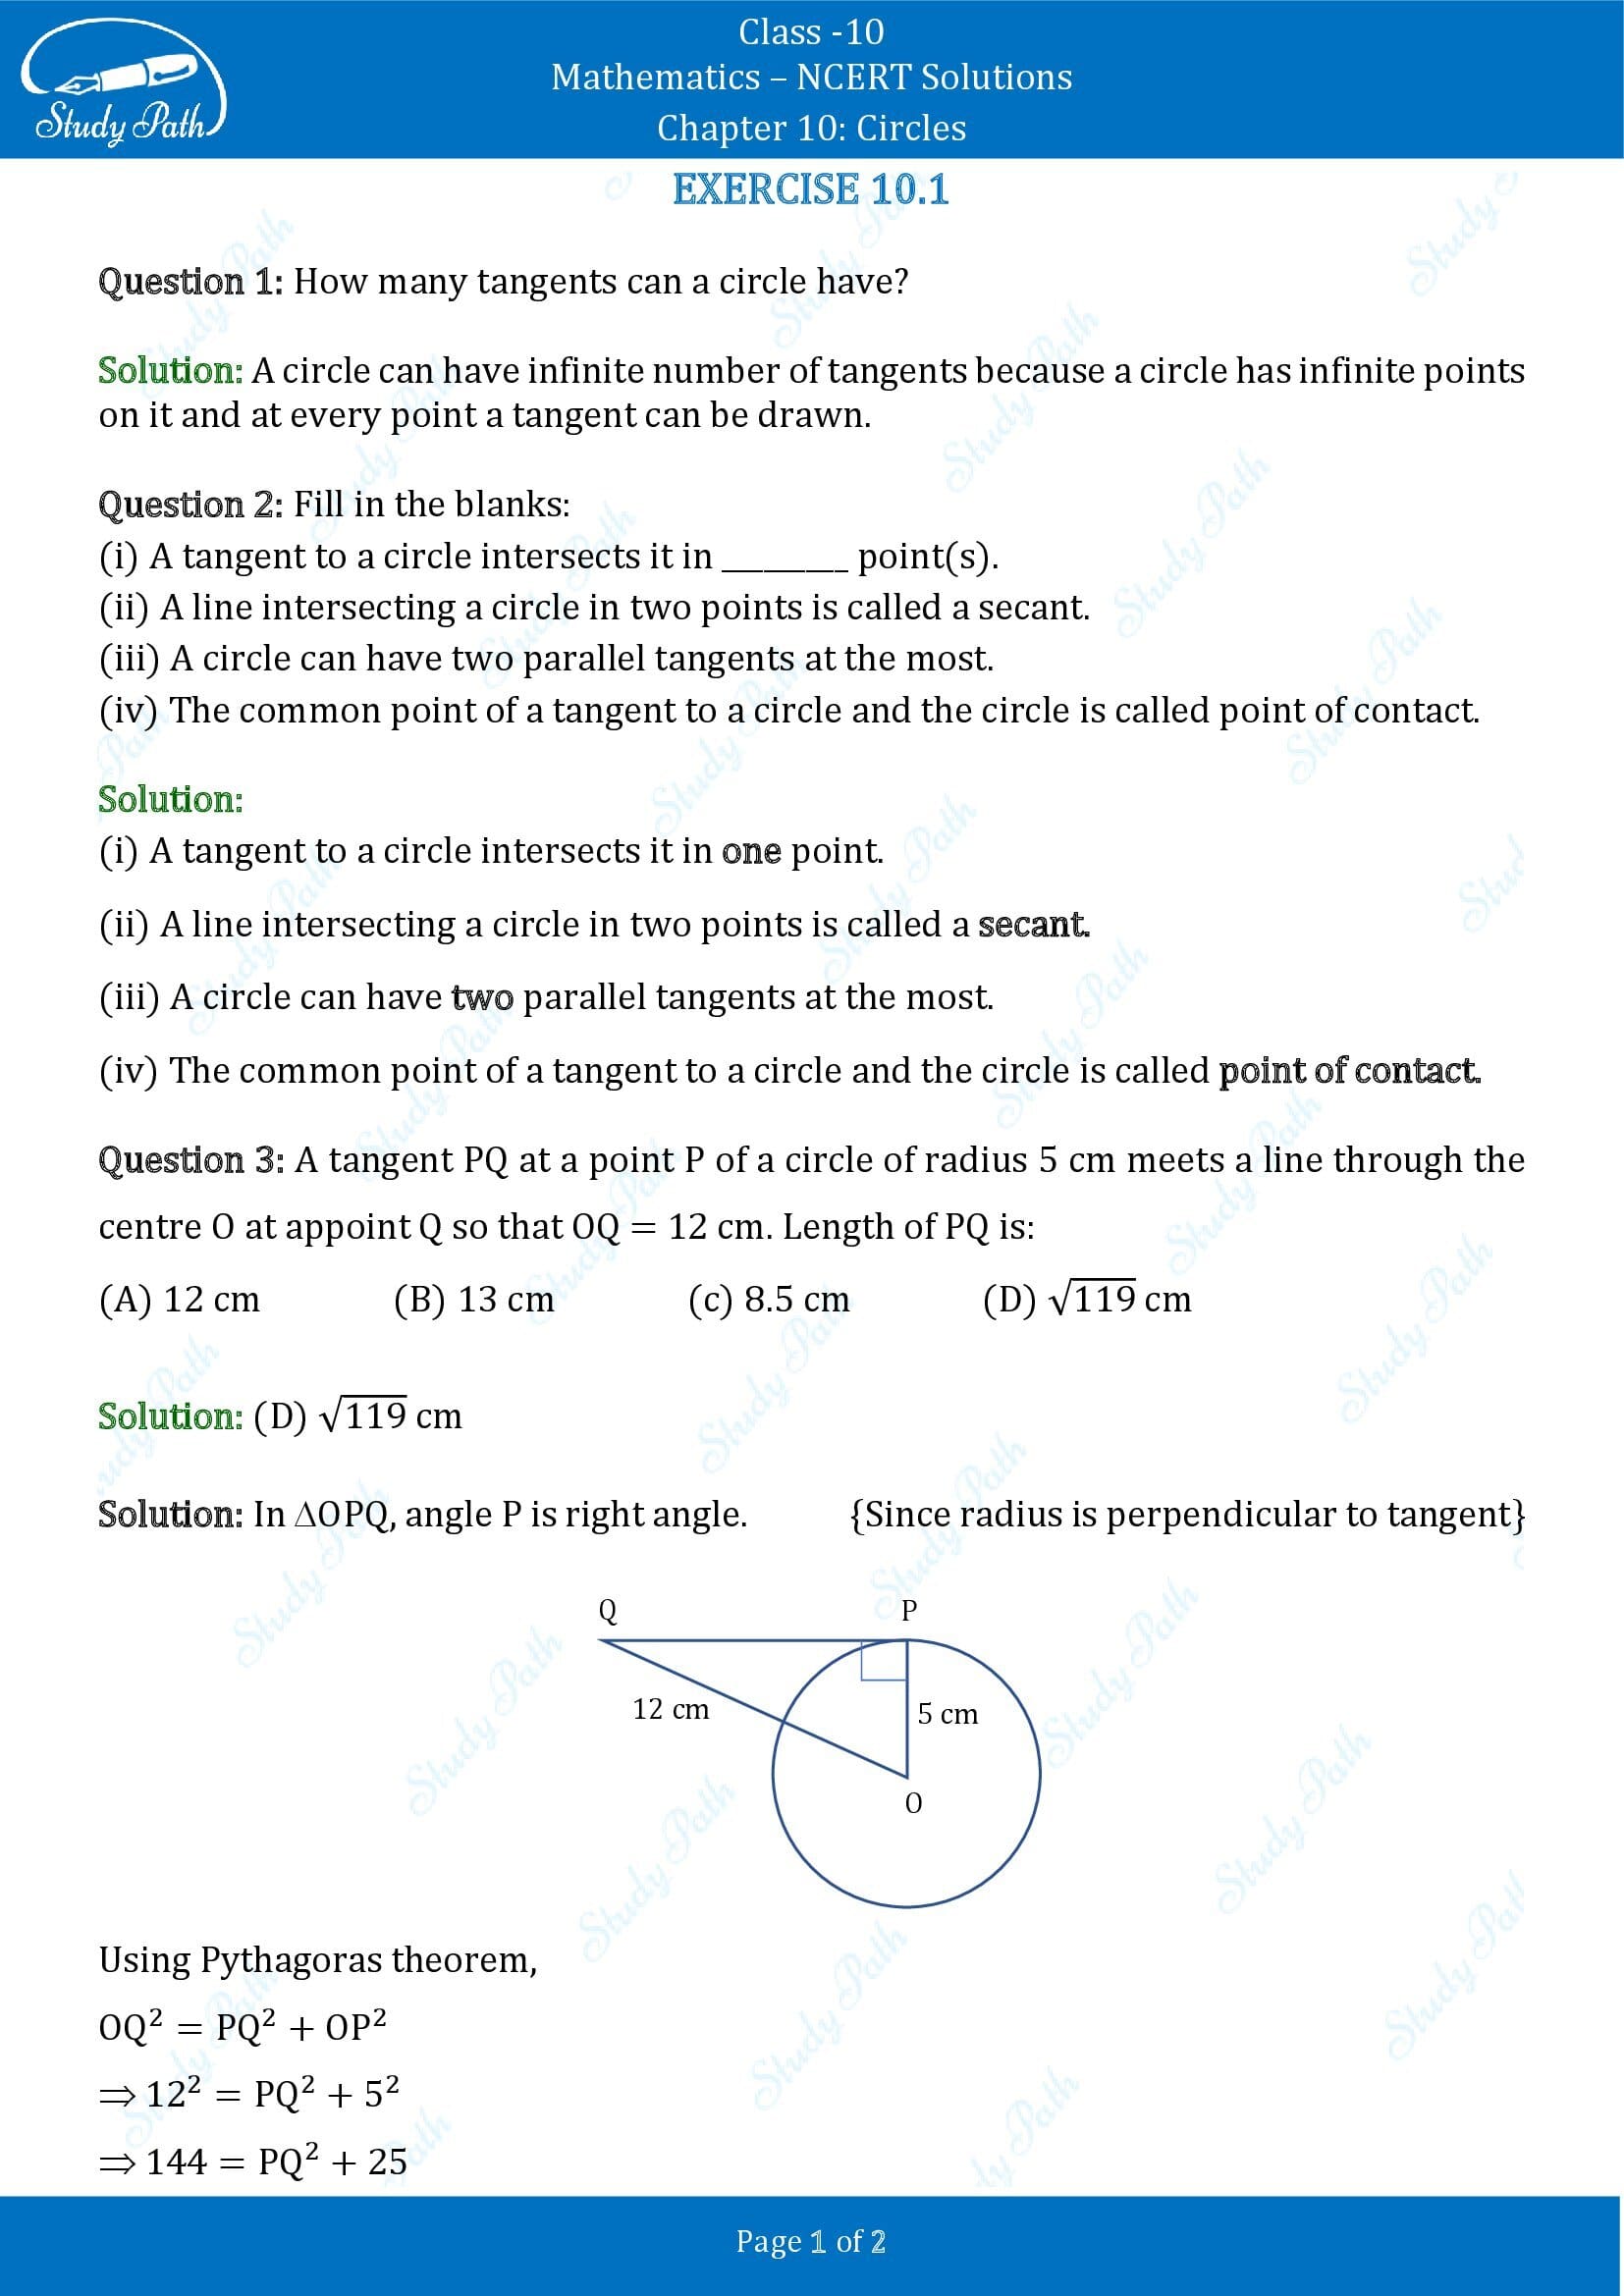 NCERT Solutions for Class 10 Maths Chapter 10 Circles Exercise 10.1 00001